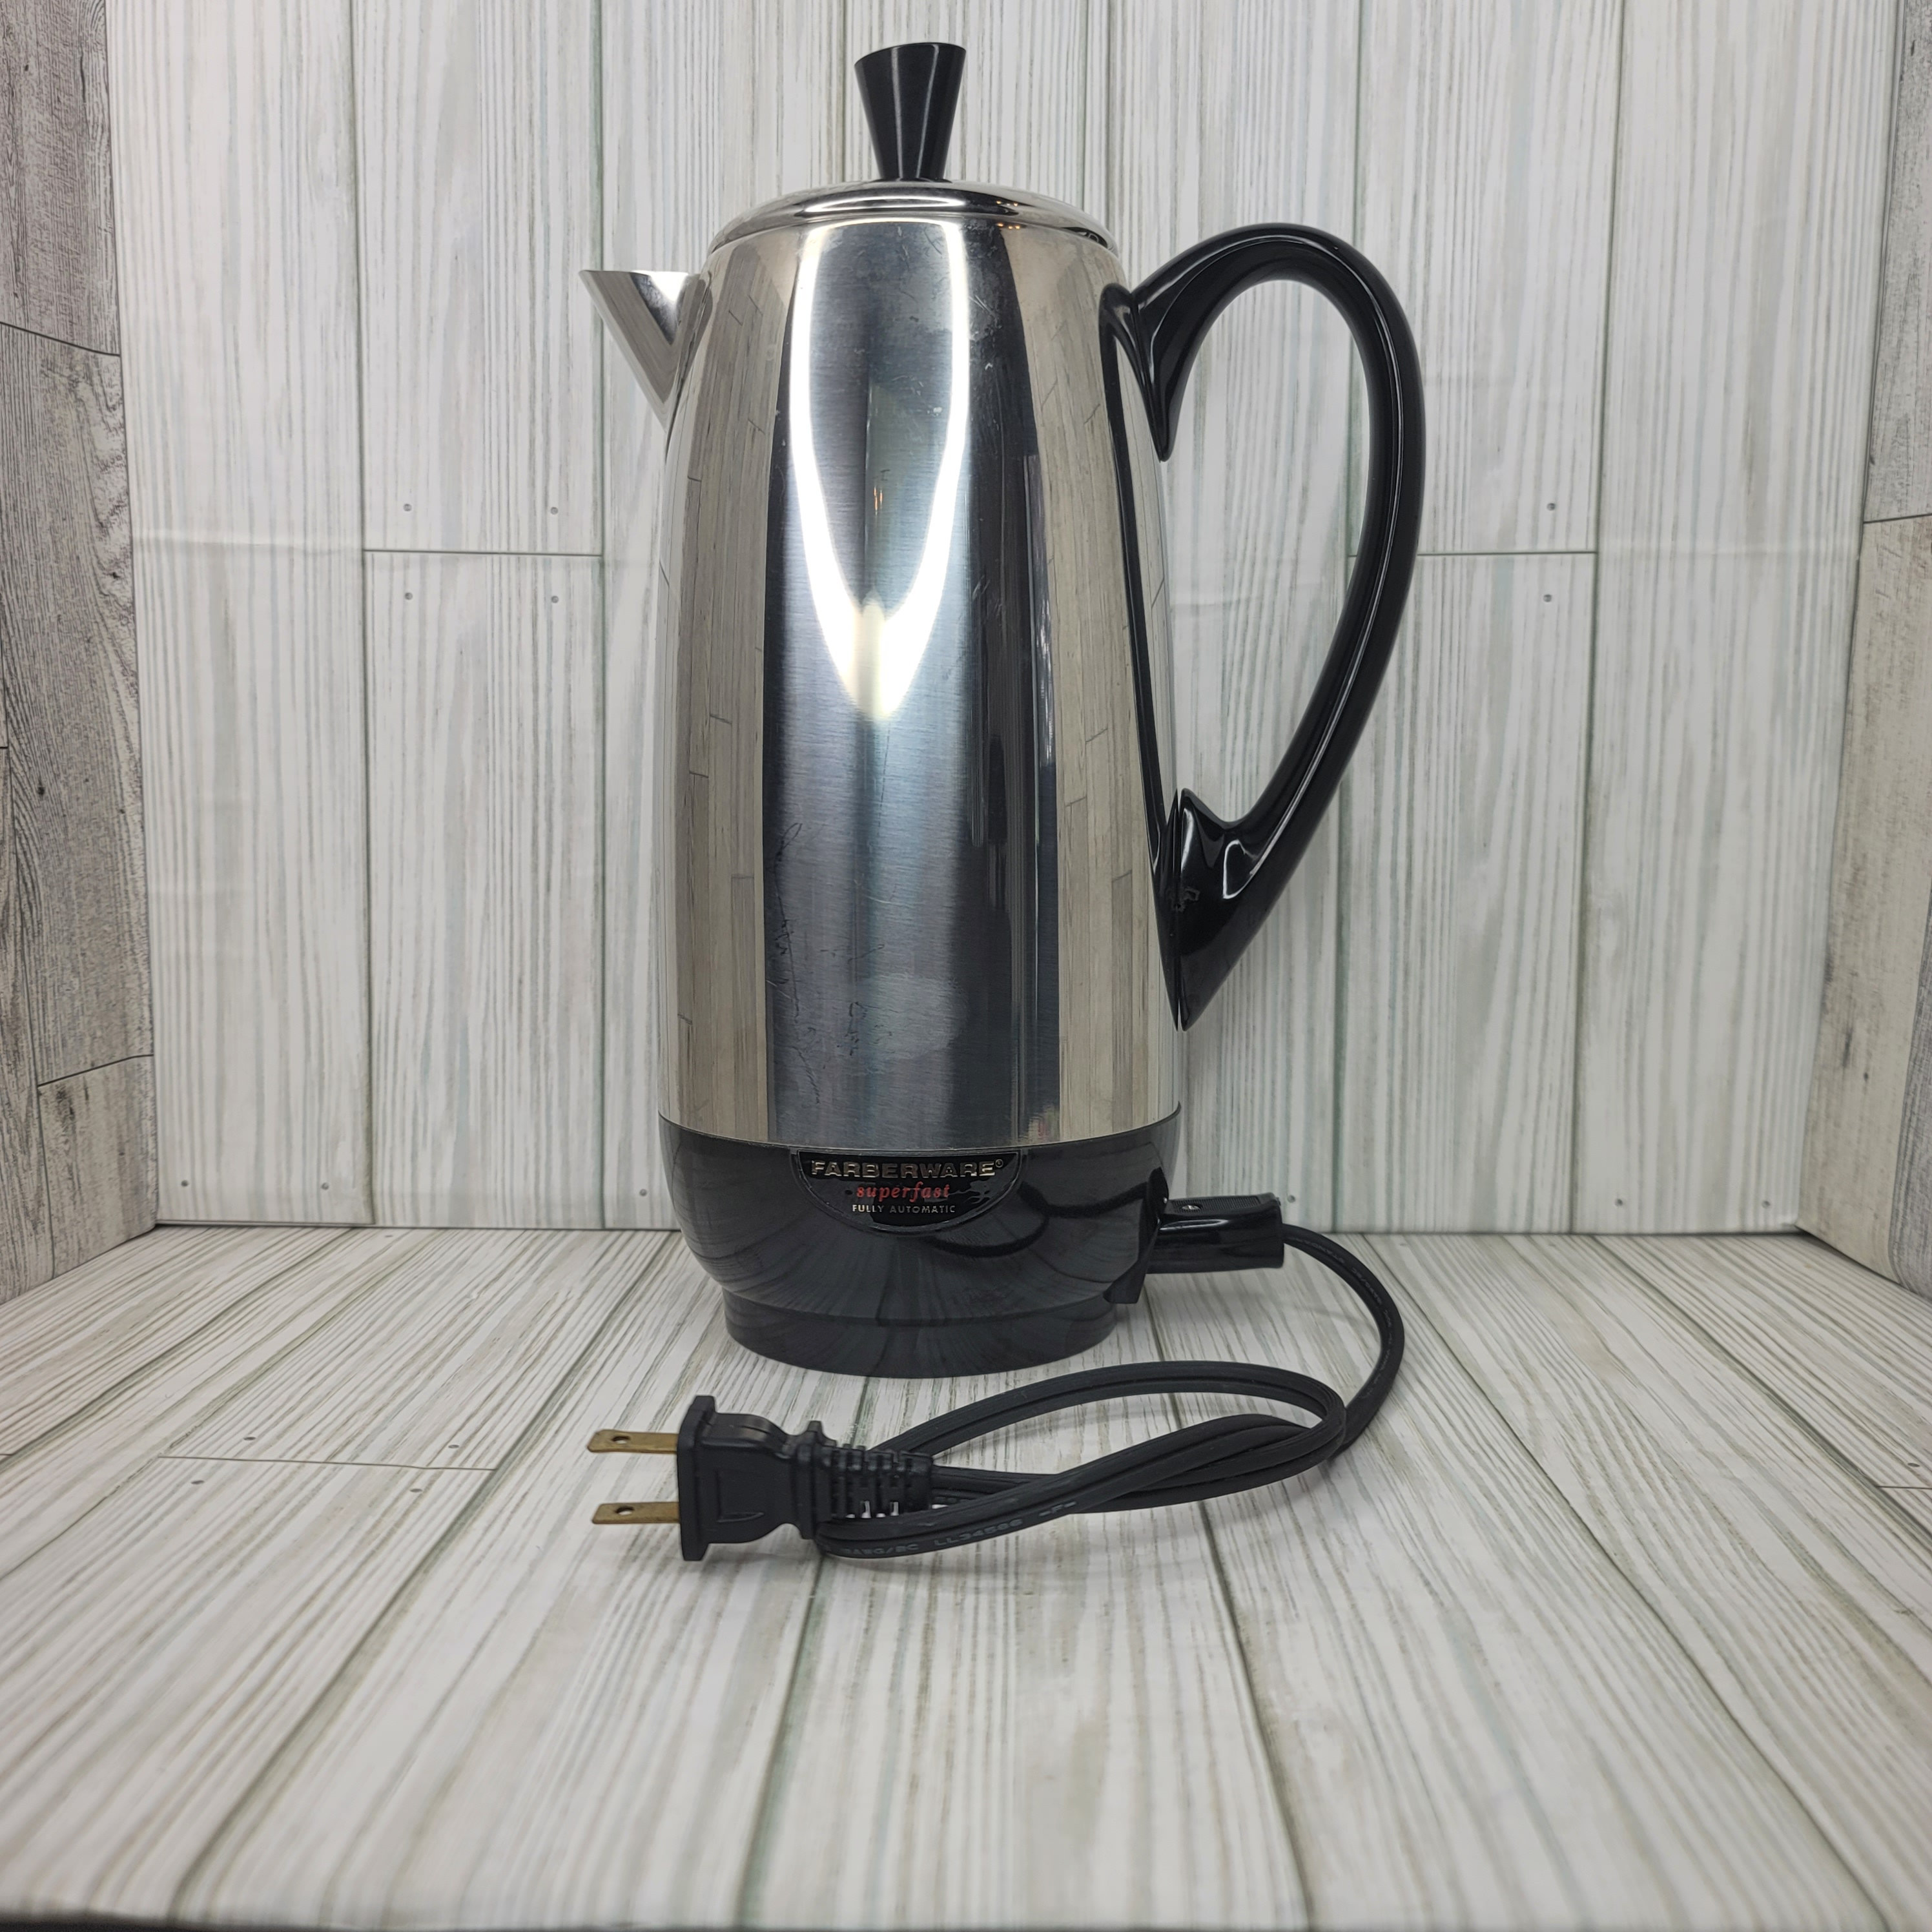 My mother's Farberware electric percolator from the late 80s/early